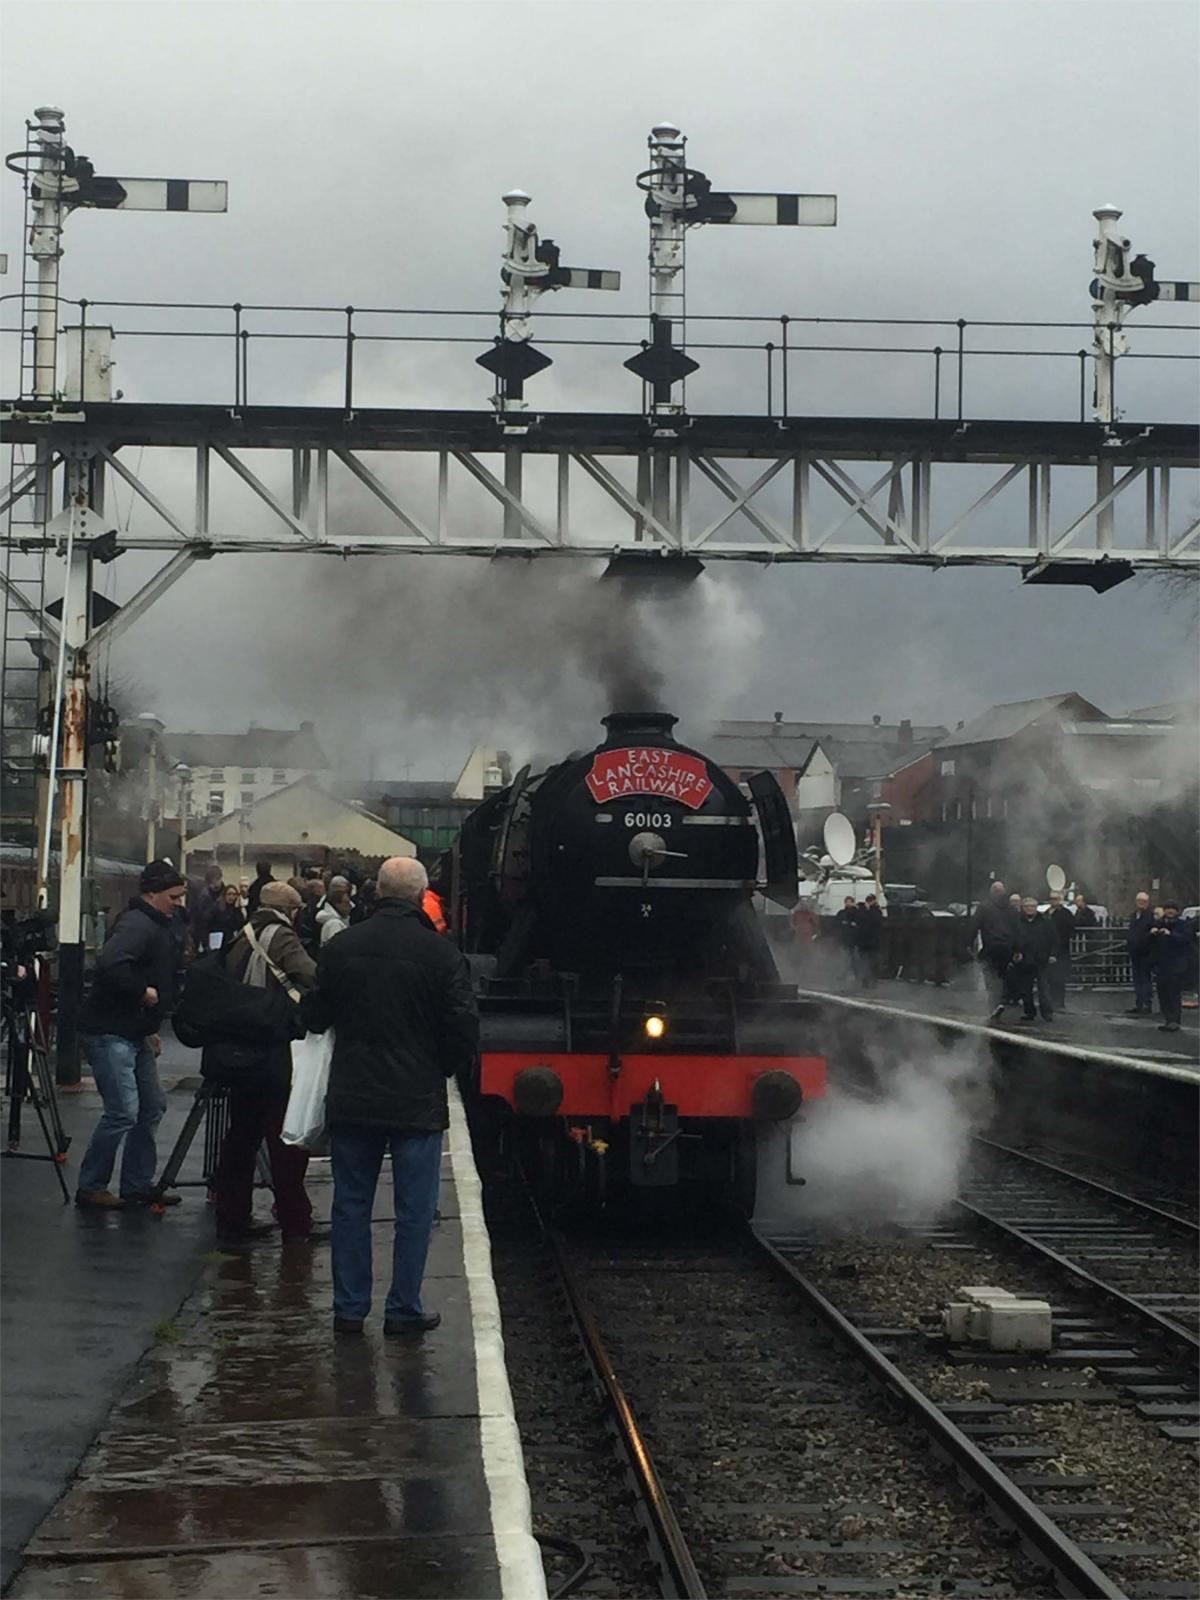 Flying Scotsman returns. Picture courtesy of East Lancashire Railway